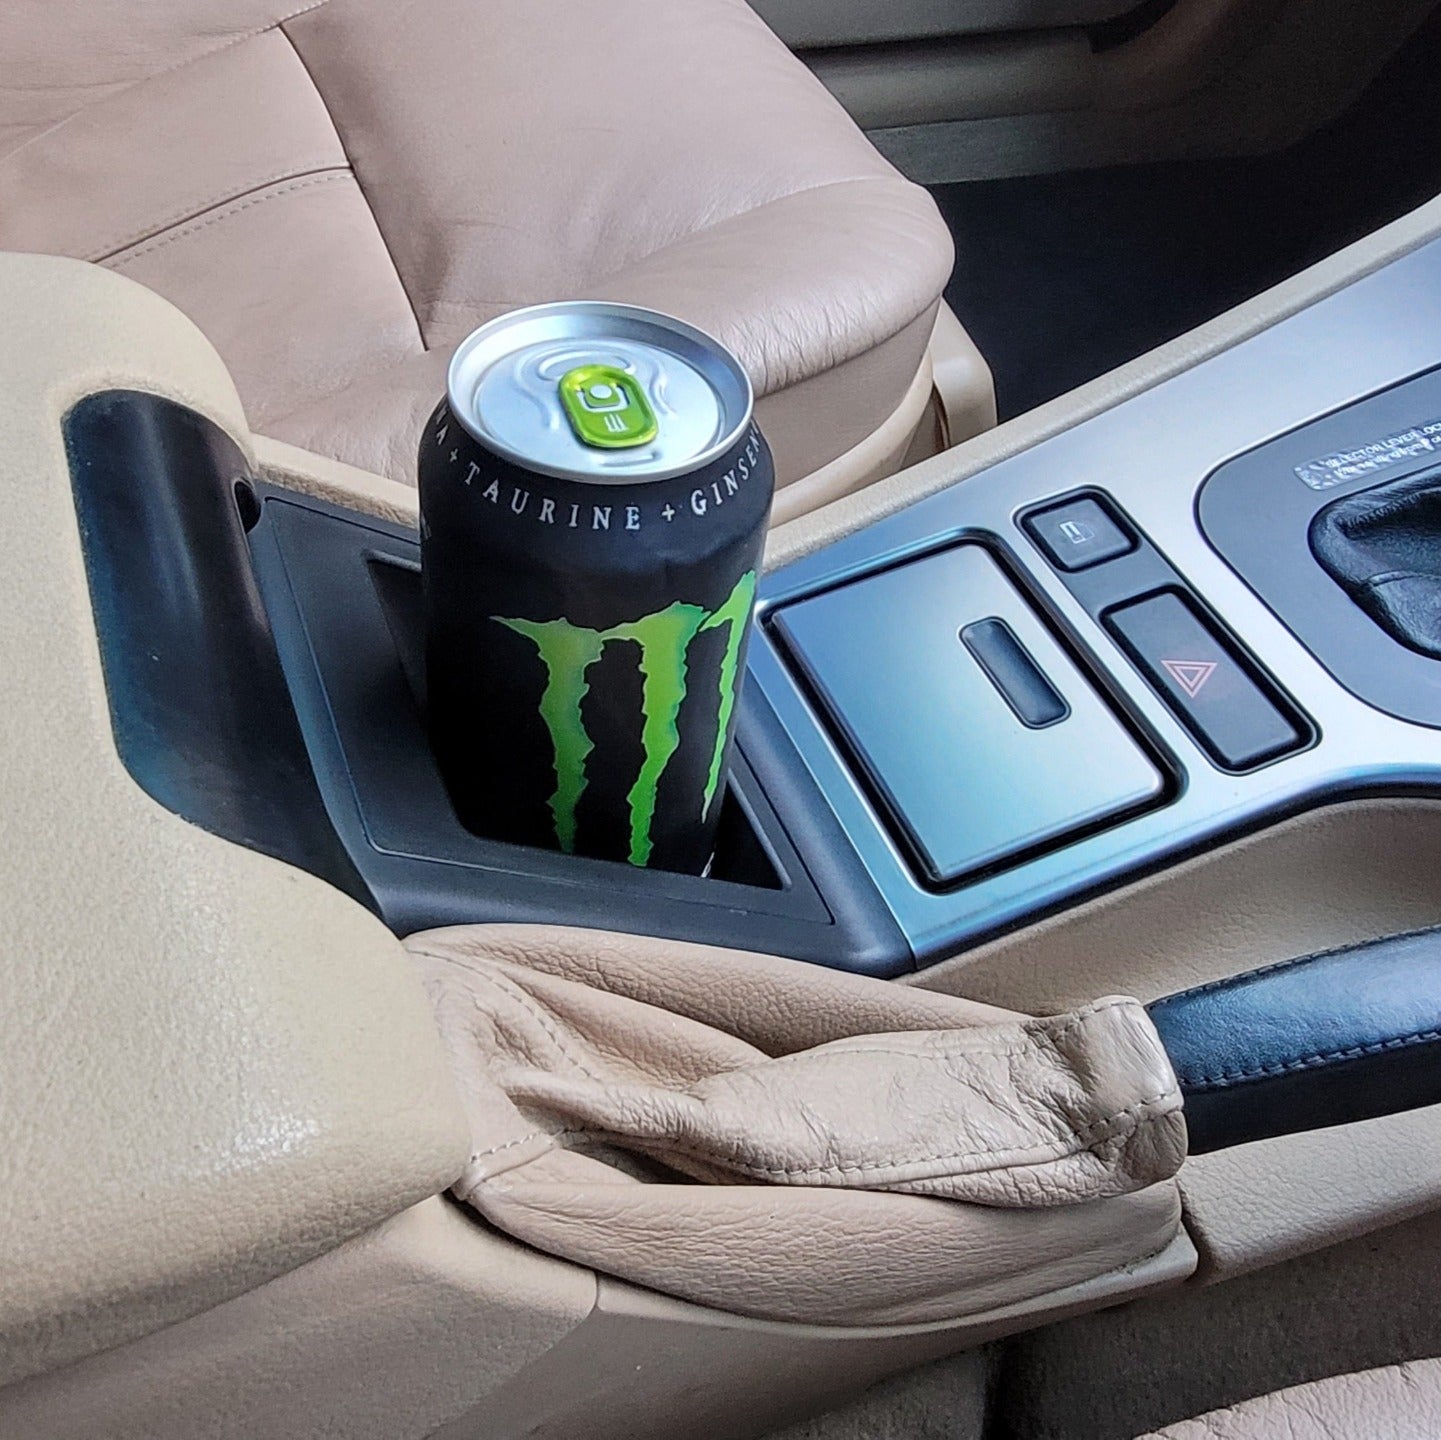 E39 Cup Holder with Monster energy drink in it